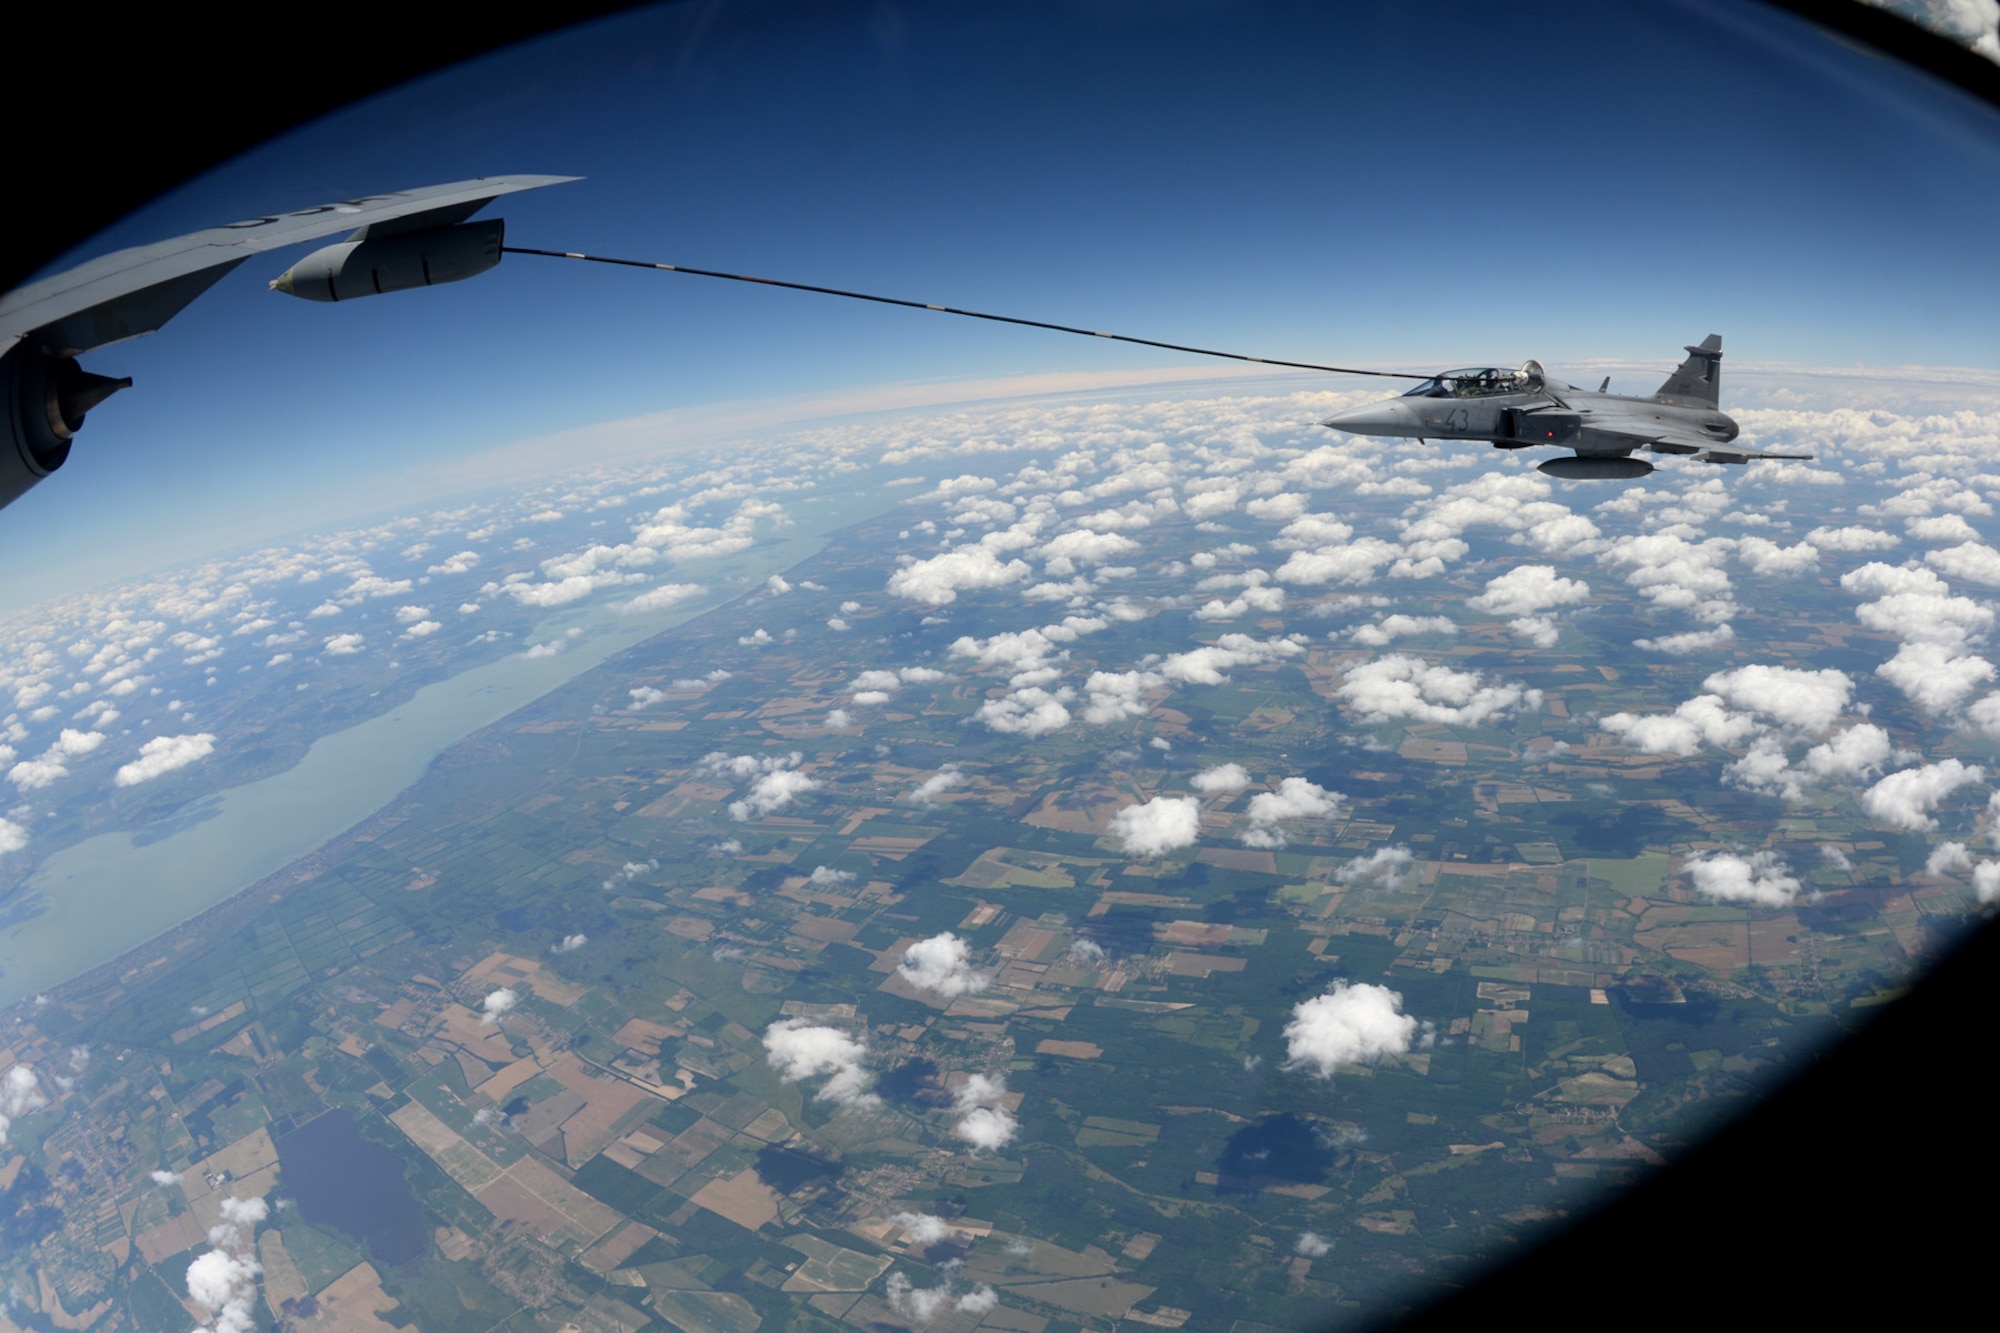 A Hungarian air force JAS-39 Gripen makes contact with a multi-point refueling system basket June 25, 2015, during air refueling familiarization training over Hungary. Hungarian, U.S. and Swedish air force personnel met for a two-week familiarization period enabling the Hungarian JAS-39 Gripen pilots to successfully perform air refueling for the first time. (U.S. Air Force photo by Senior Airman Kate Thornton/Released)